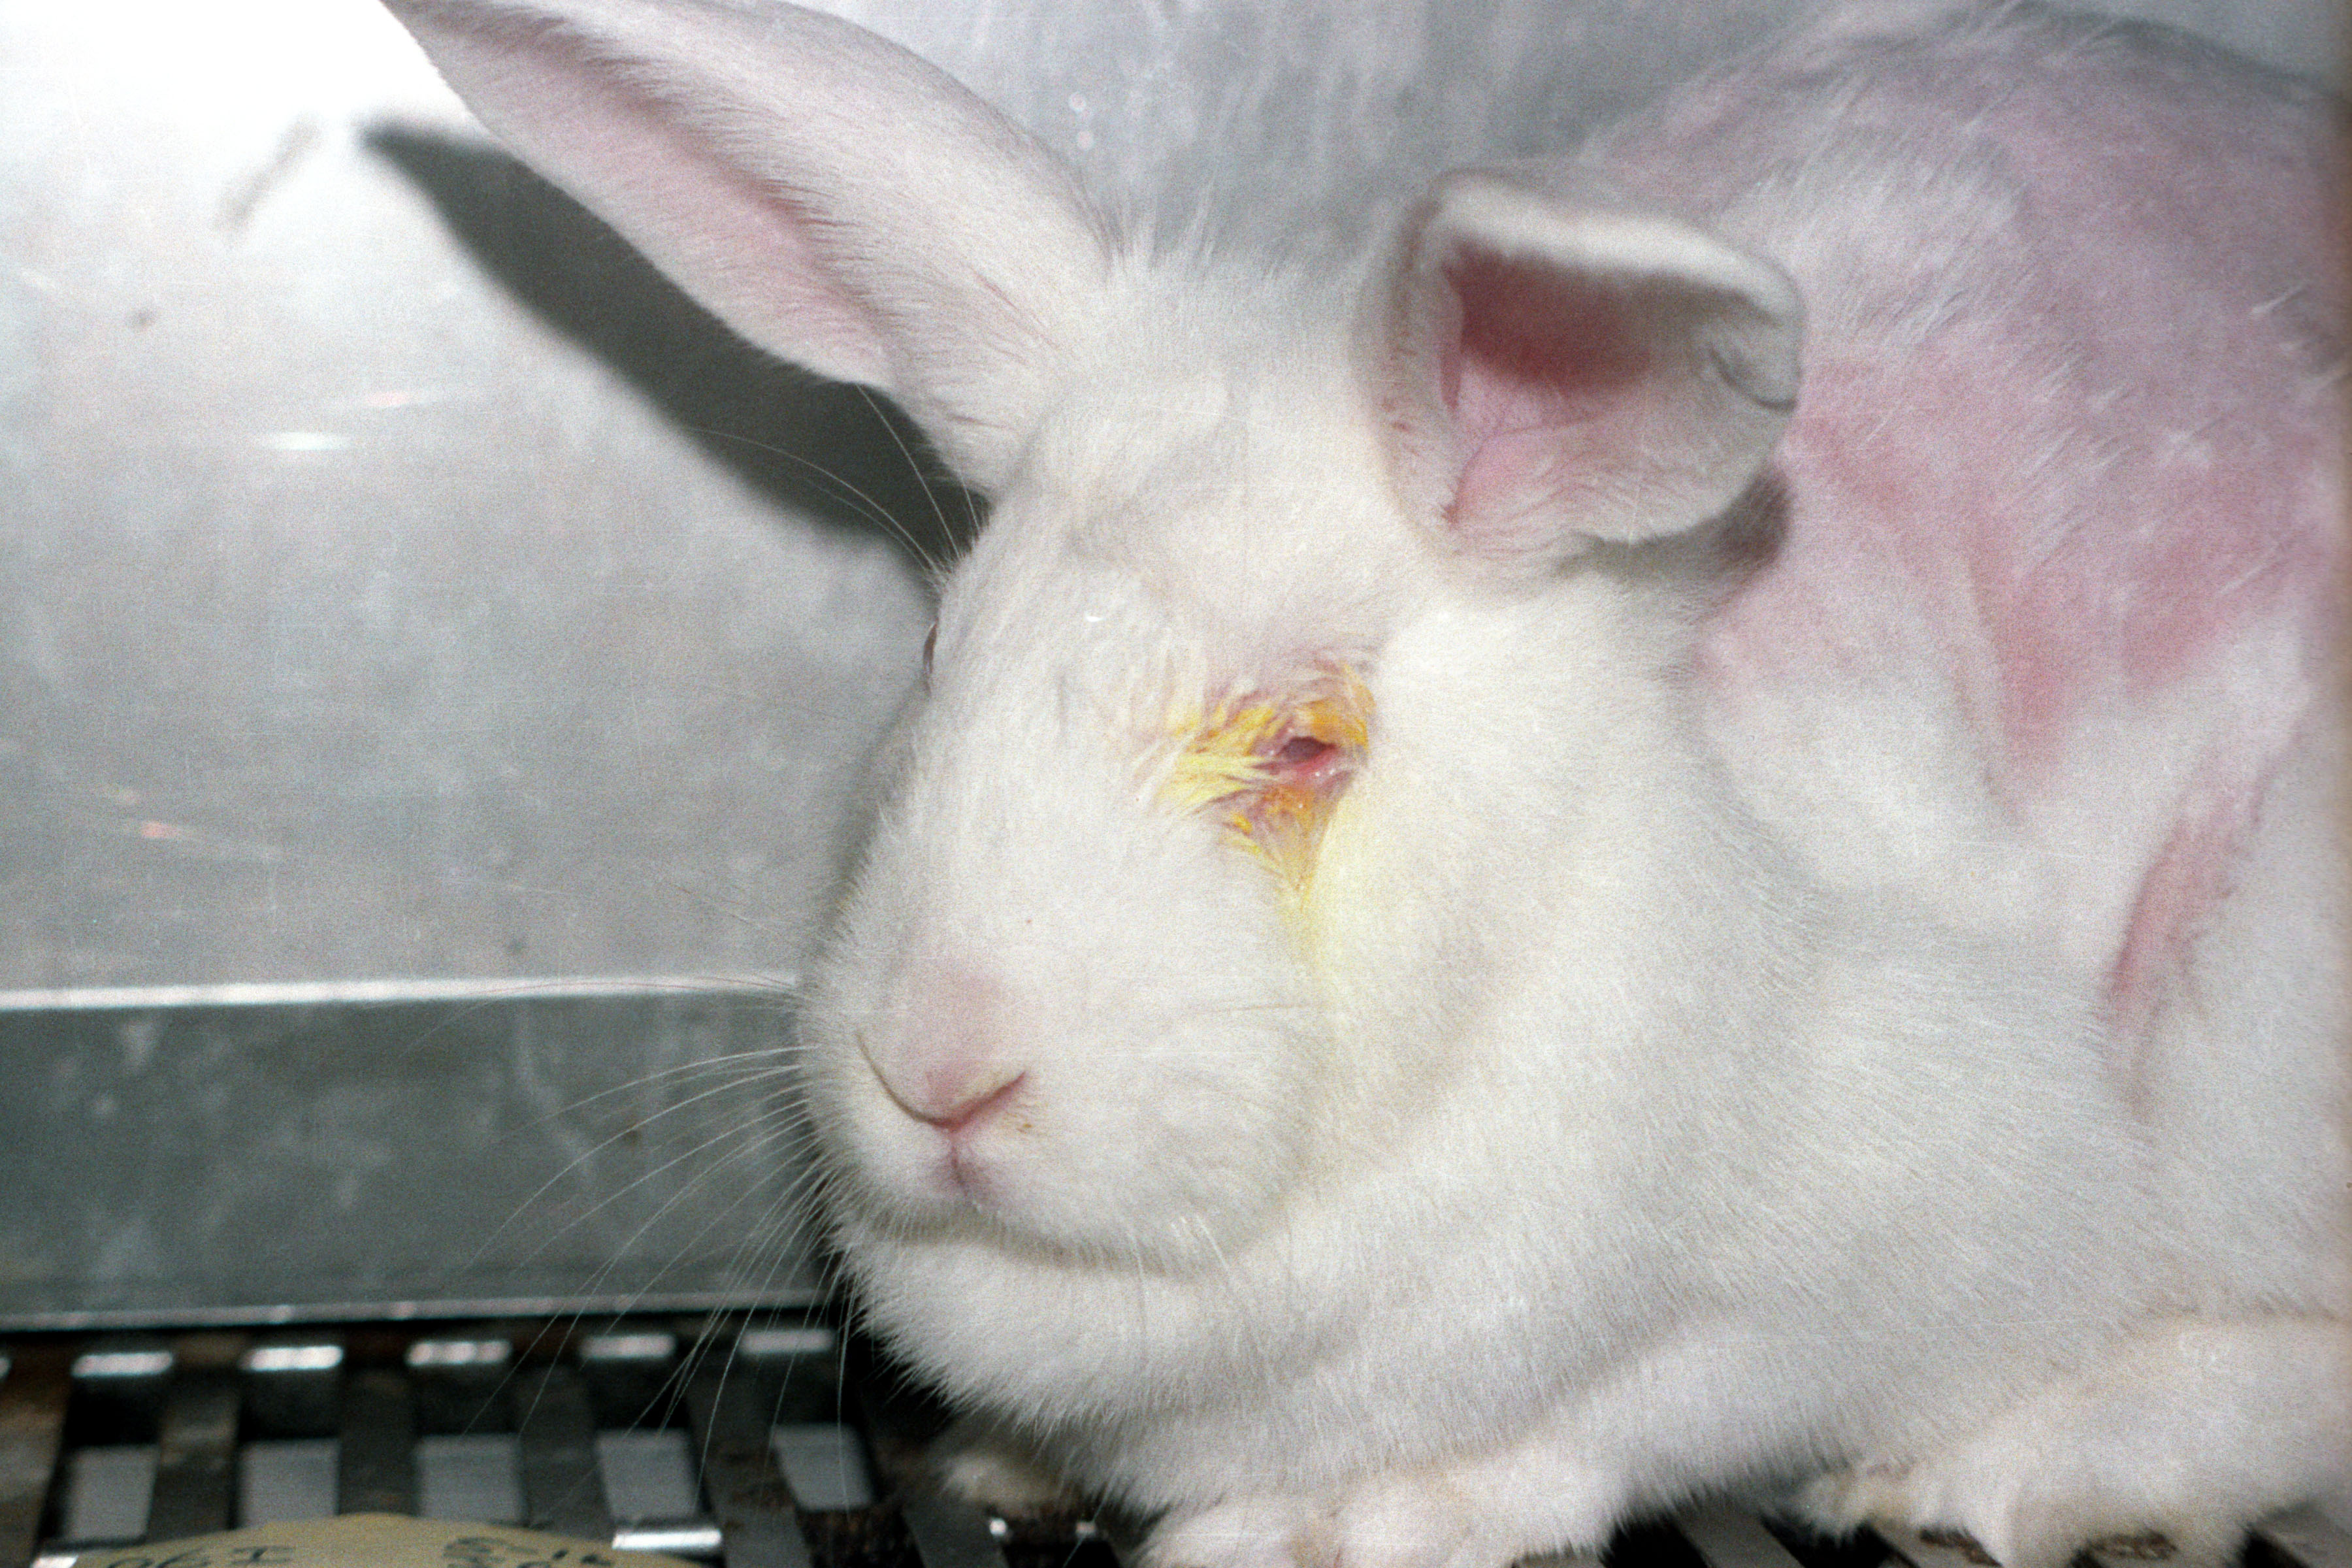 Good News From New Zealand – Animal Testing for Cosmetics Banned!